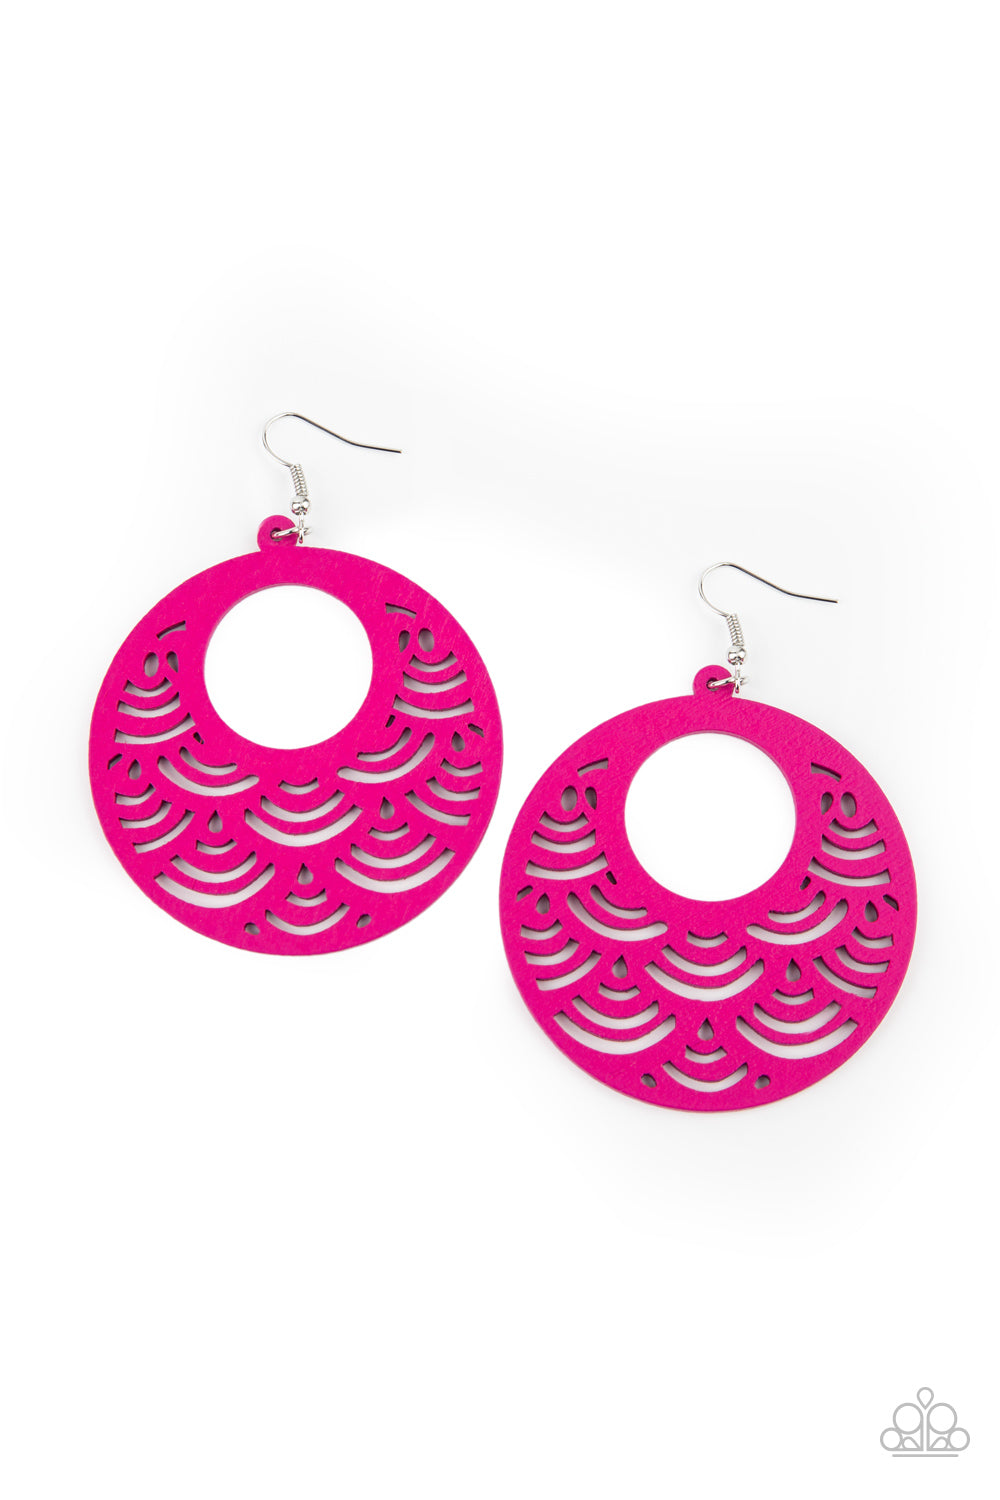 SEA Le Vie! - Pink - Spiffy Chick Jewelry